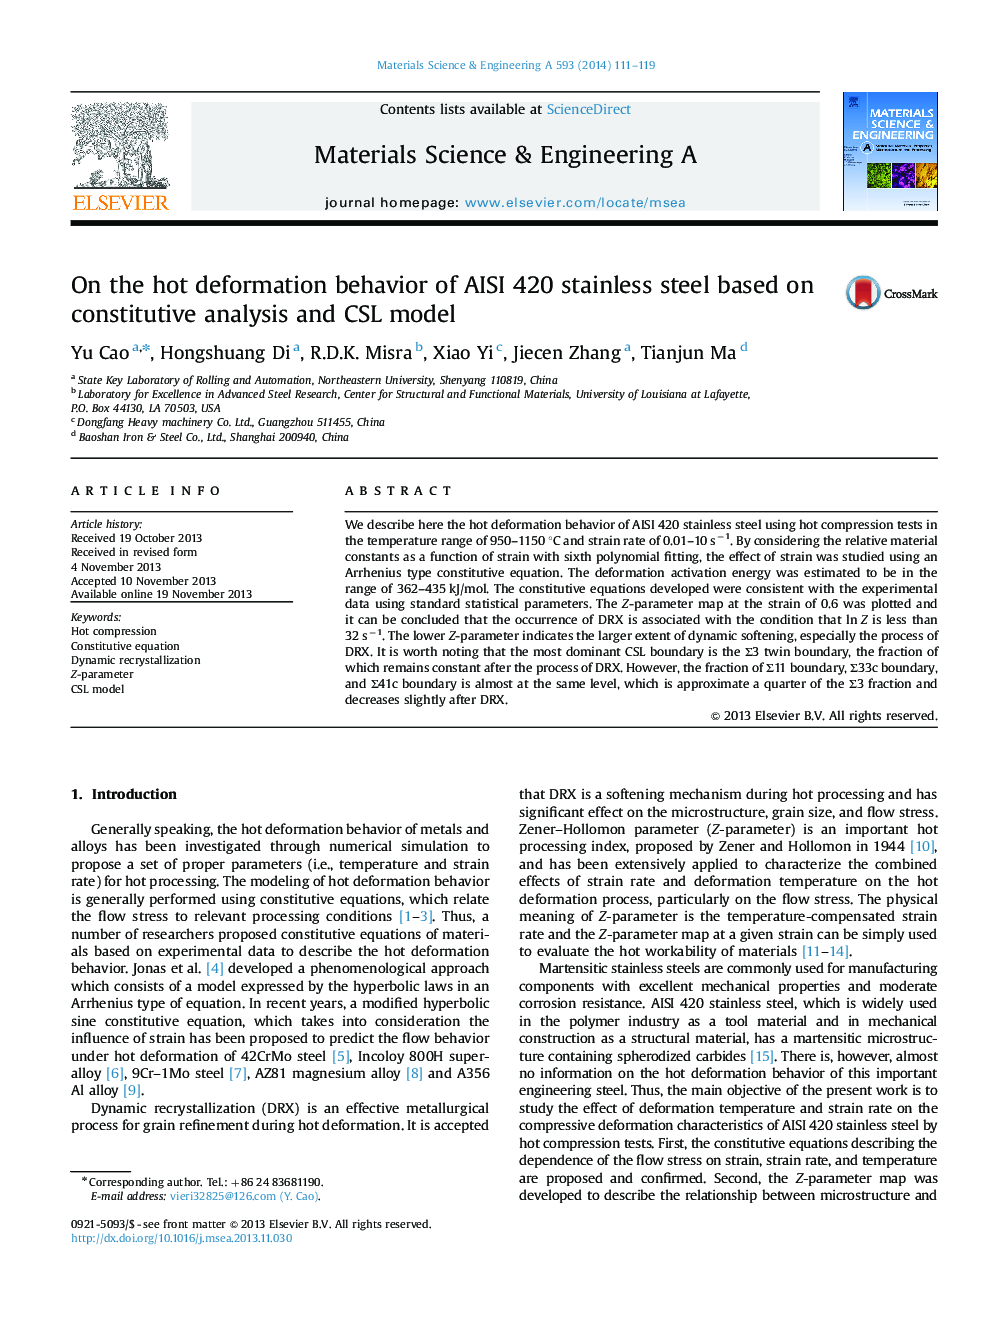 On the hot deformation behavior of AISI 420 stainless steel based on constitutive analysis and CSL model